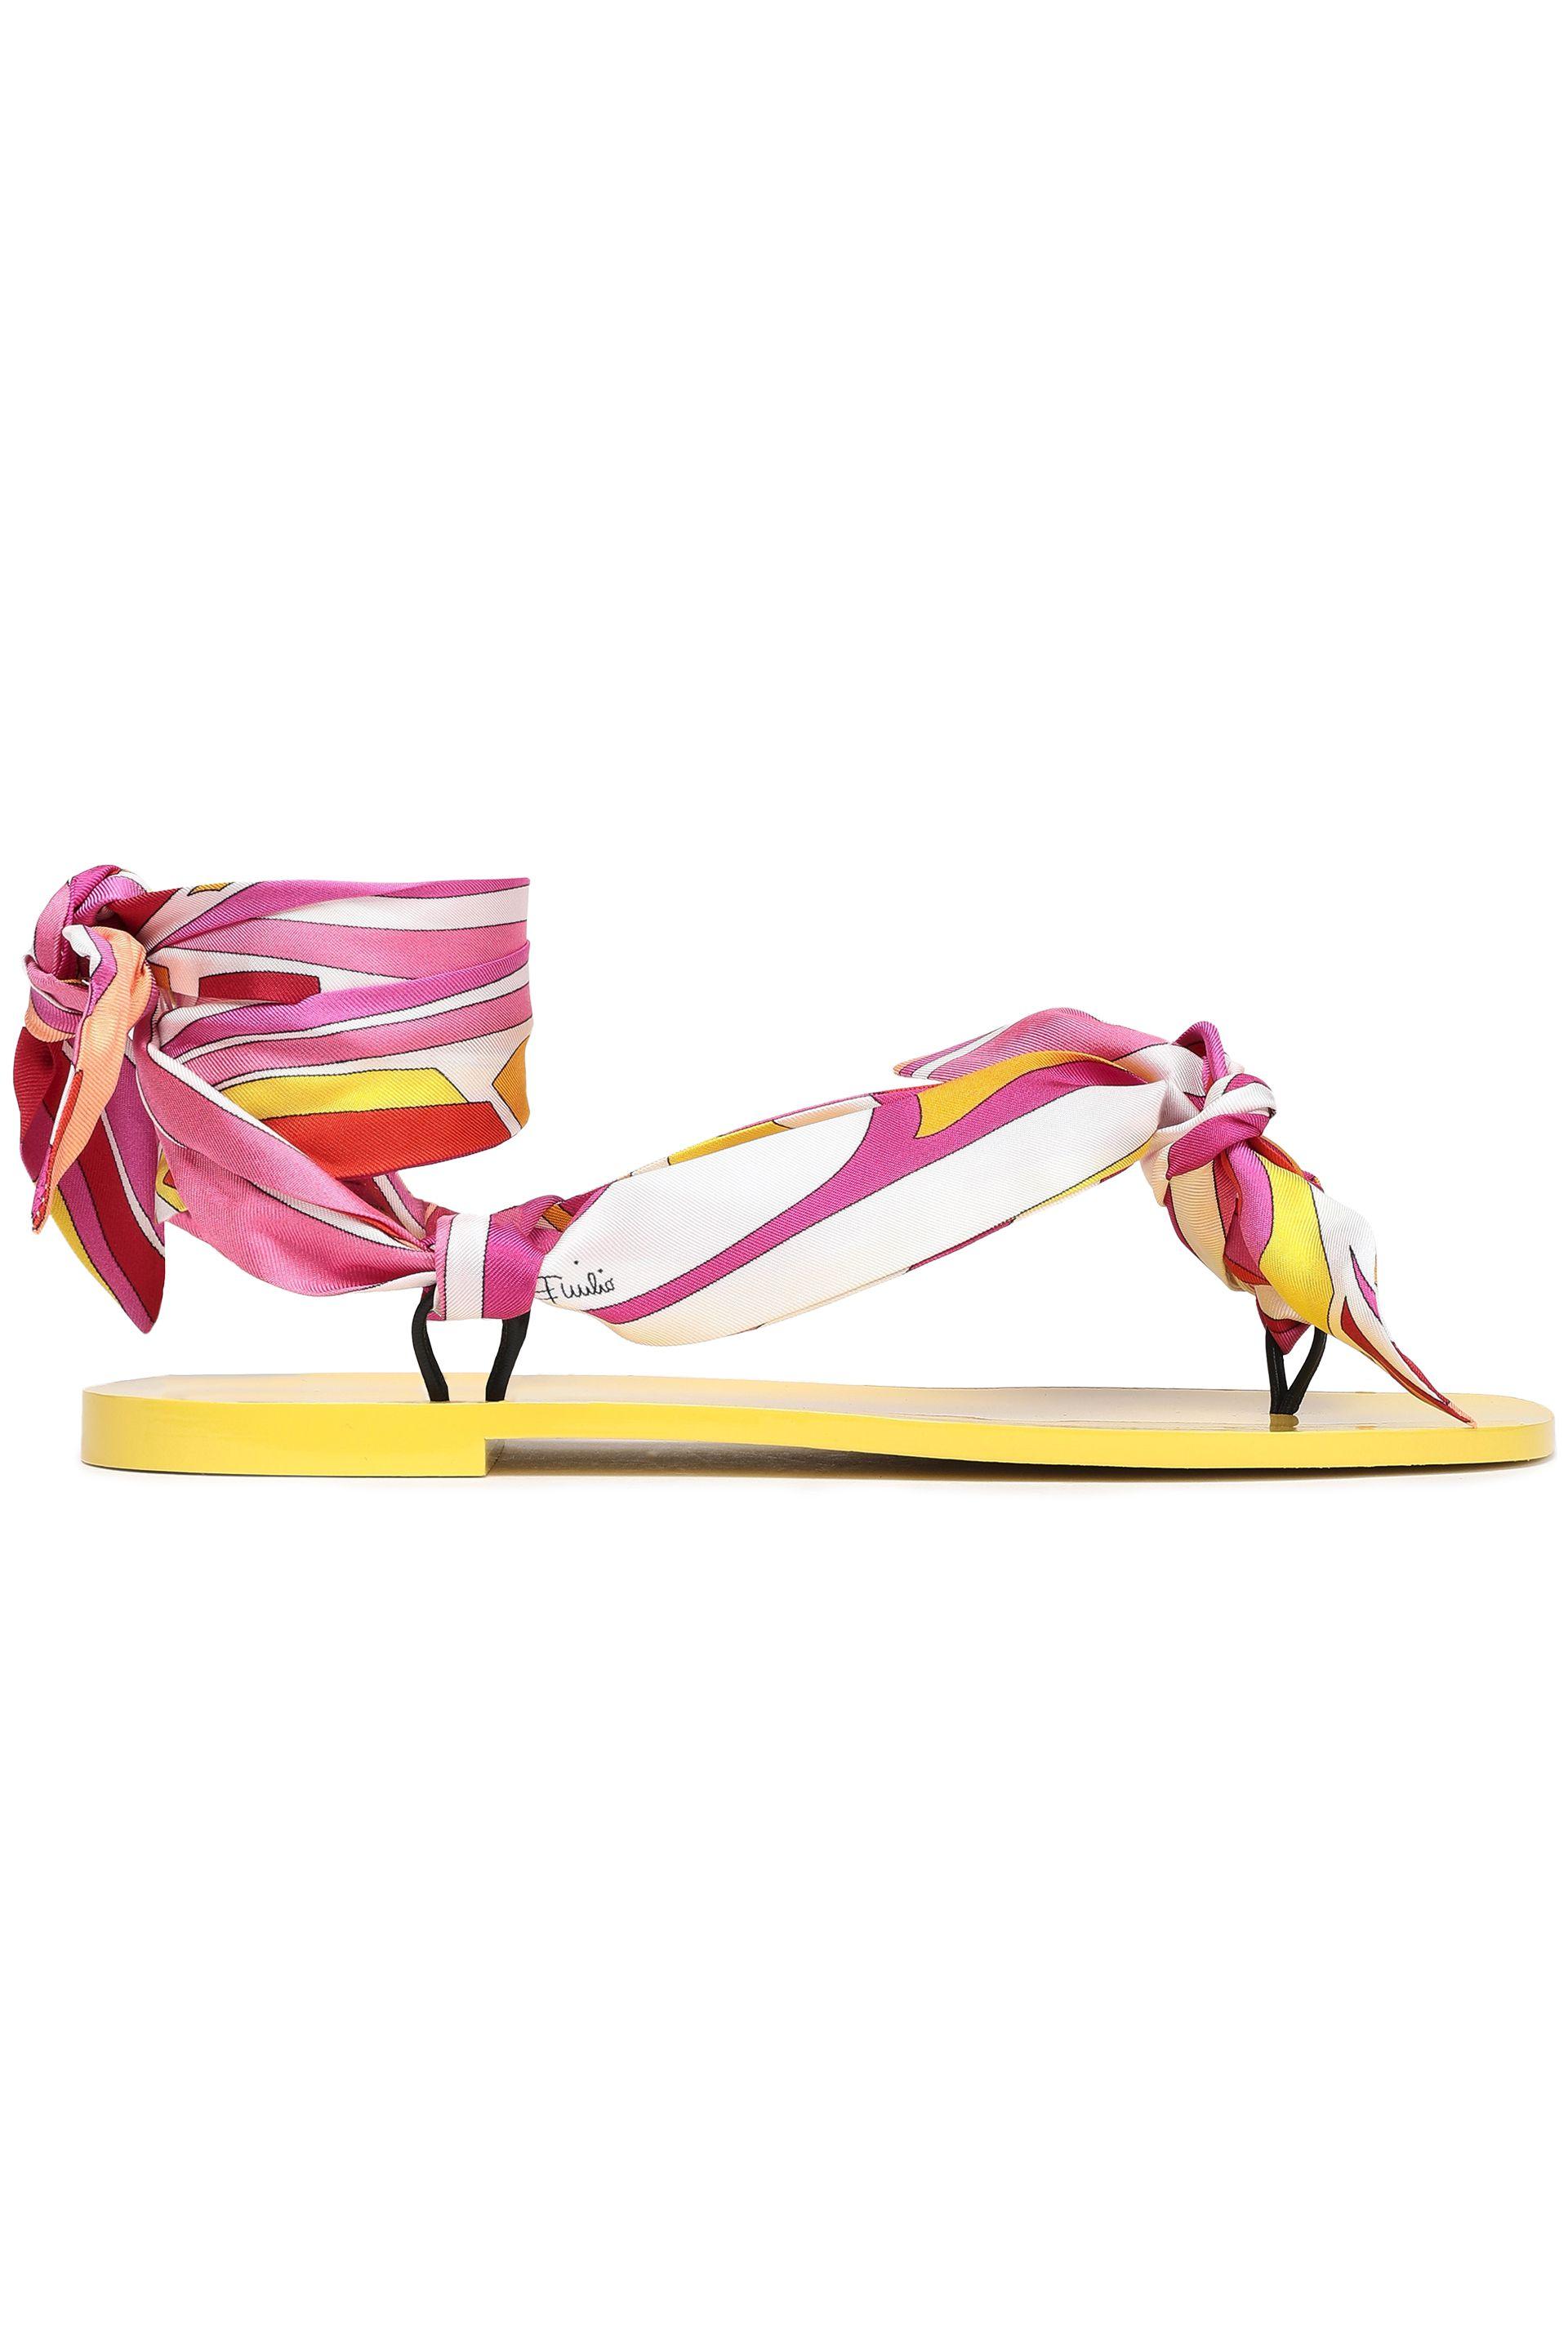 Emilio Pucci Leather Lace-up Printed Twill Flip Flops Yellow in 